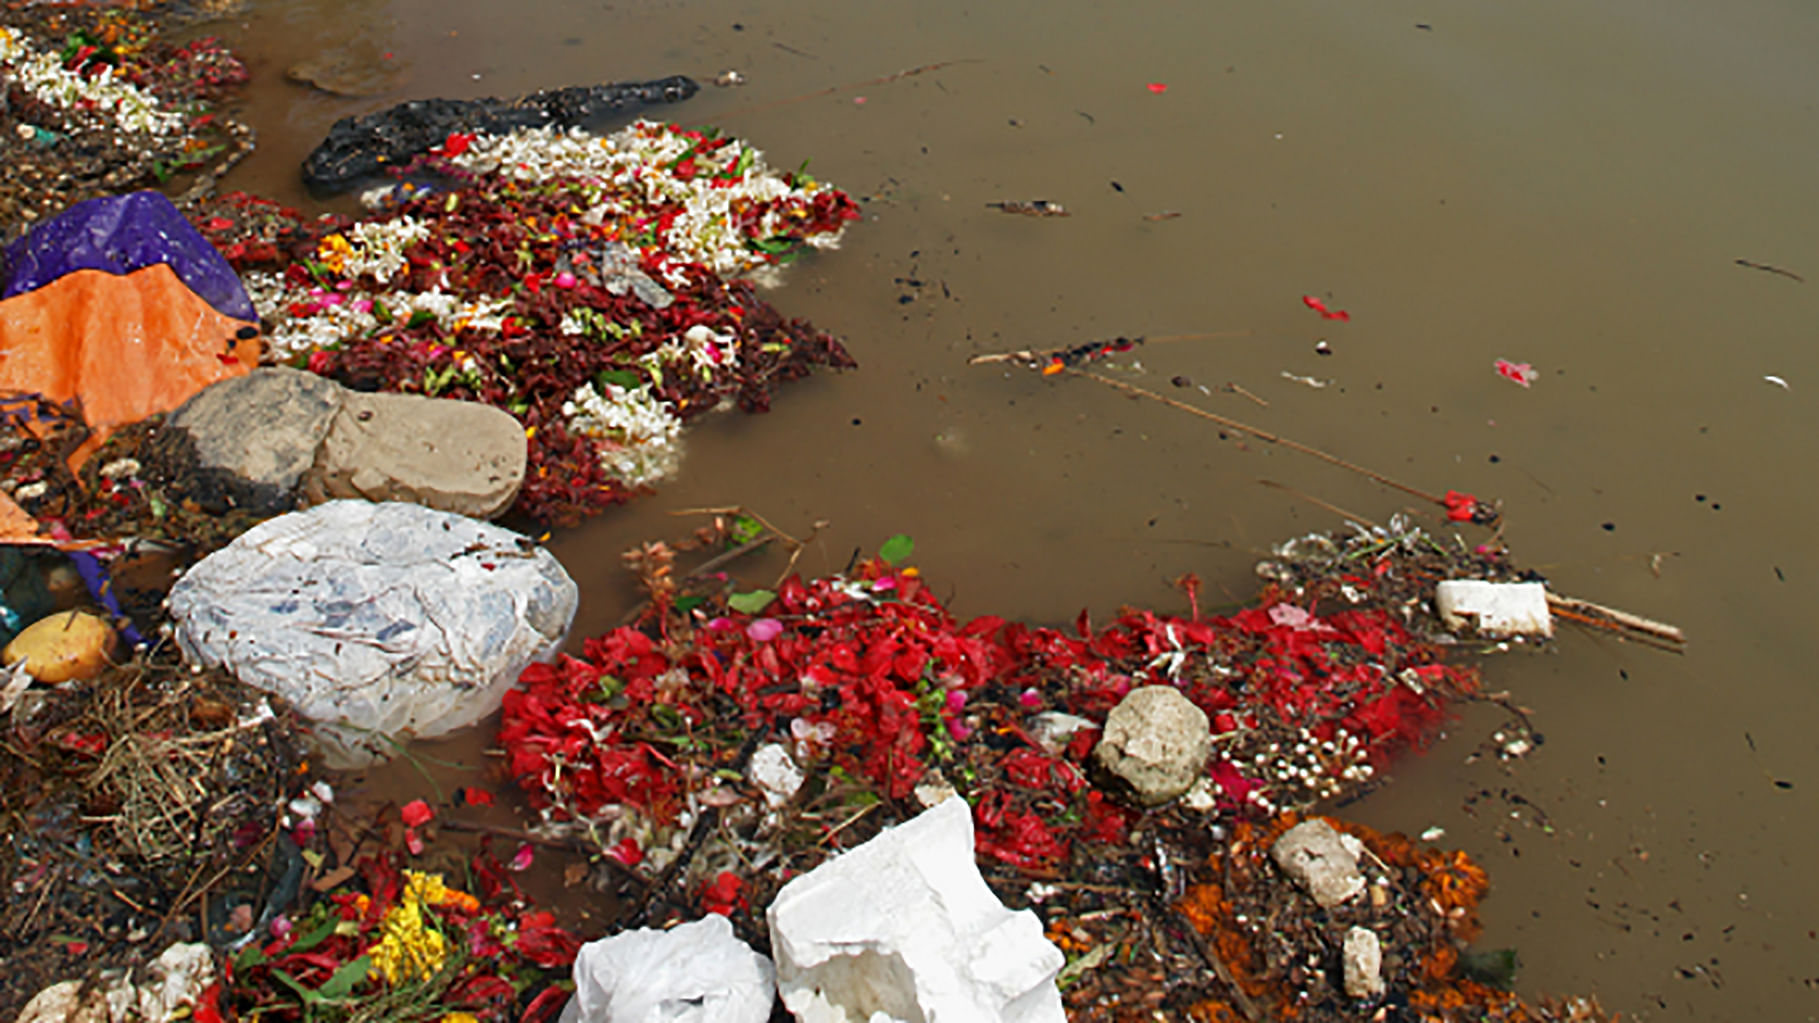 Garbage dumped in a water body. (Photo: iStockphoto)